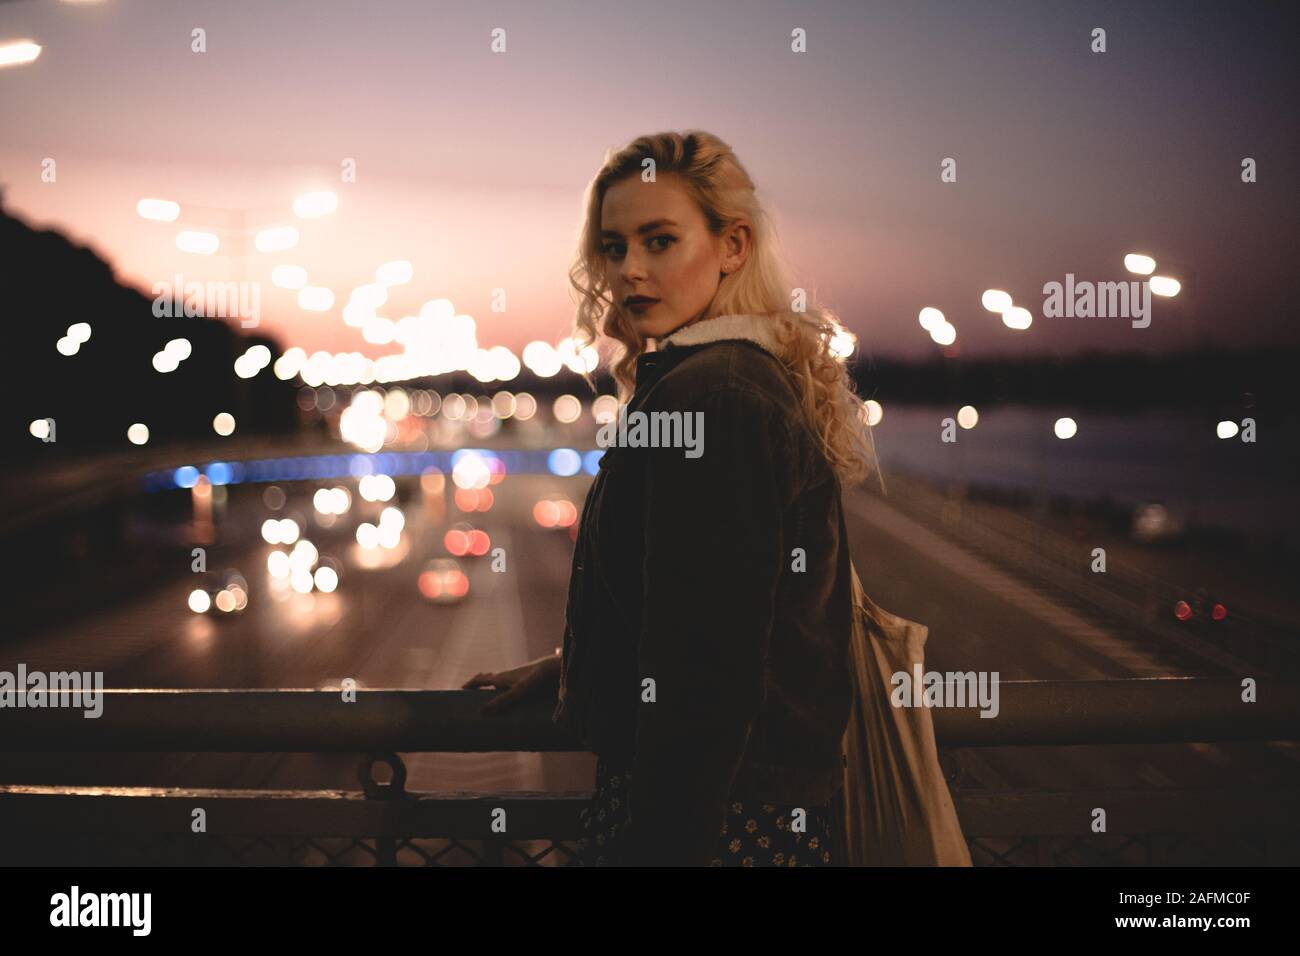 Young woman standing on bridge in city against sky at sunset Stock Photo